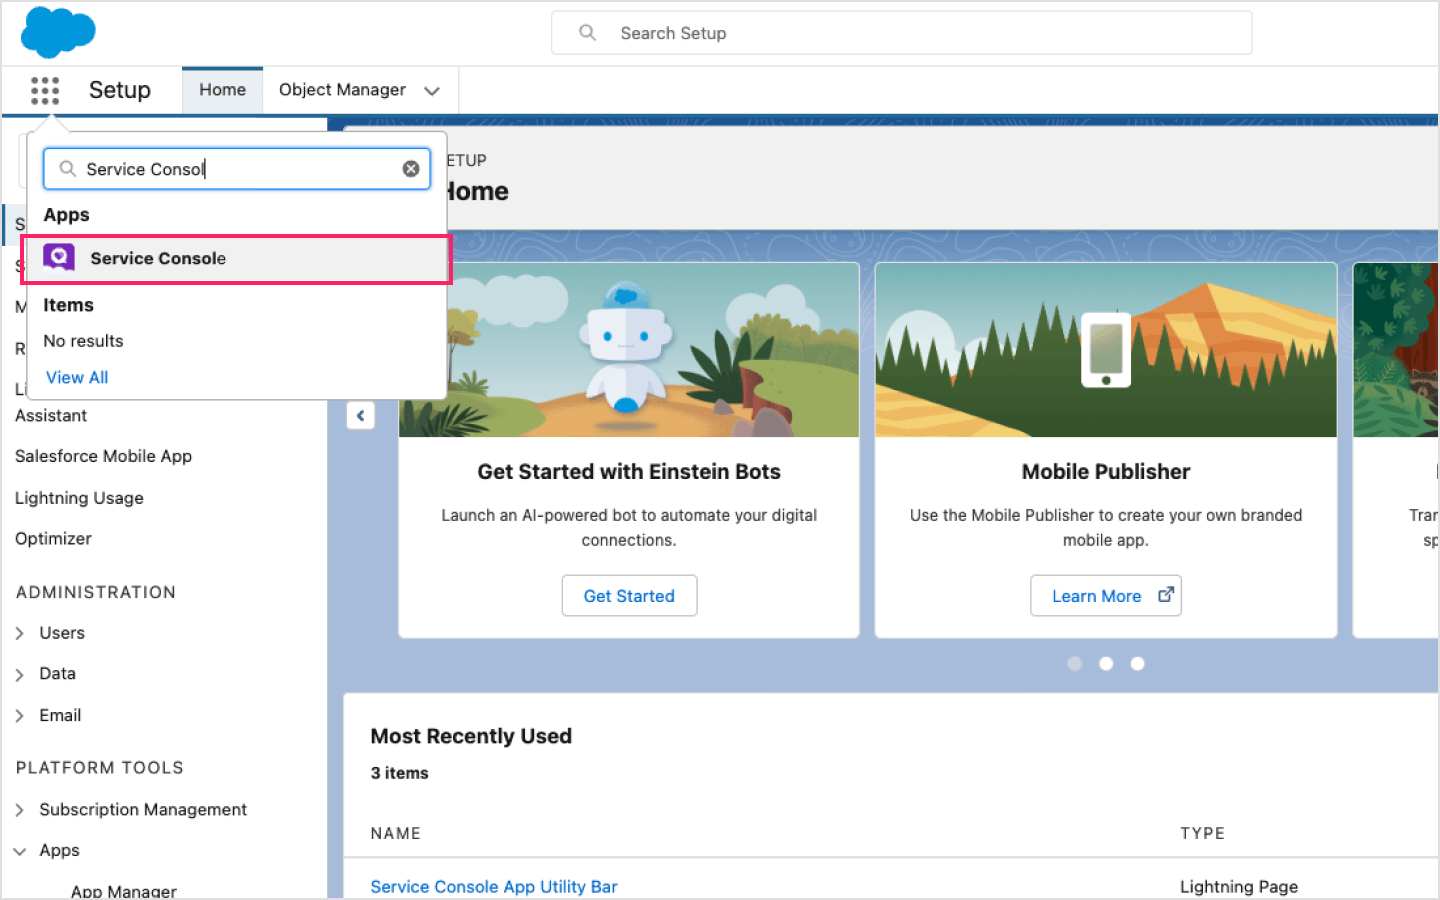 image|A screenshot of finding Service Console under Apps on Salesforce